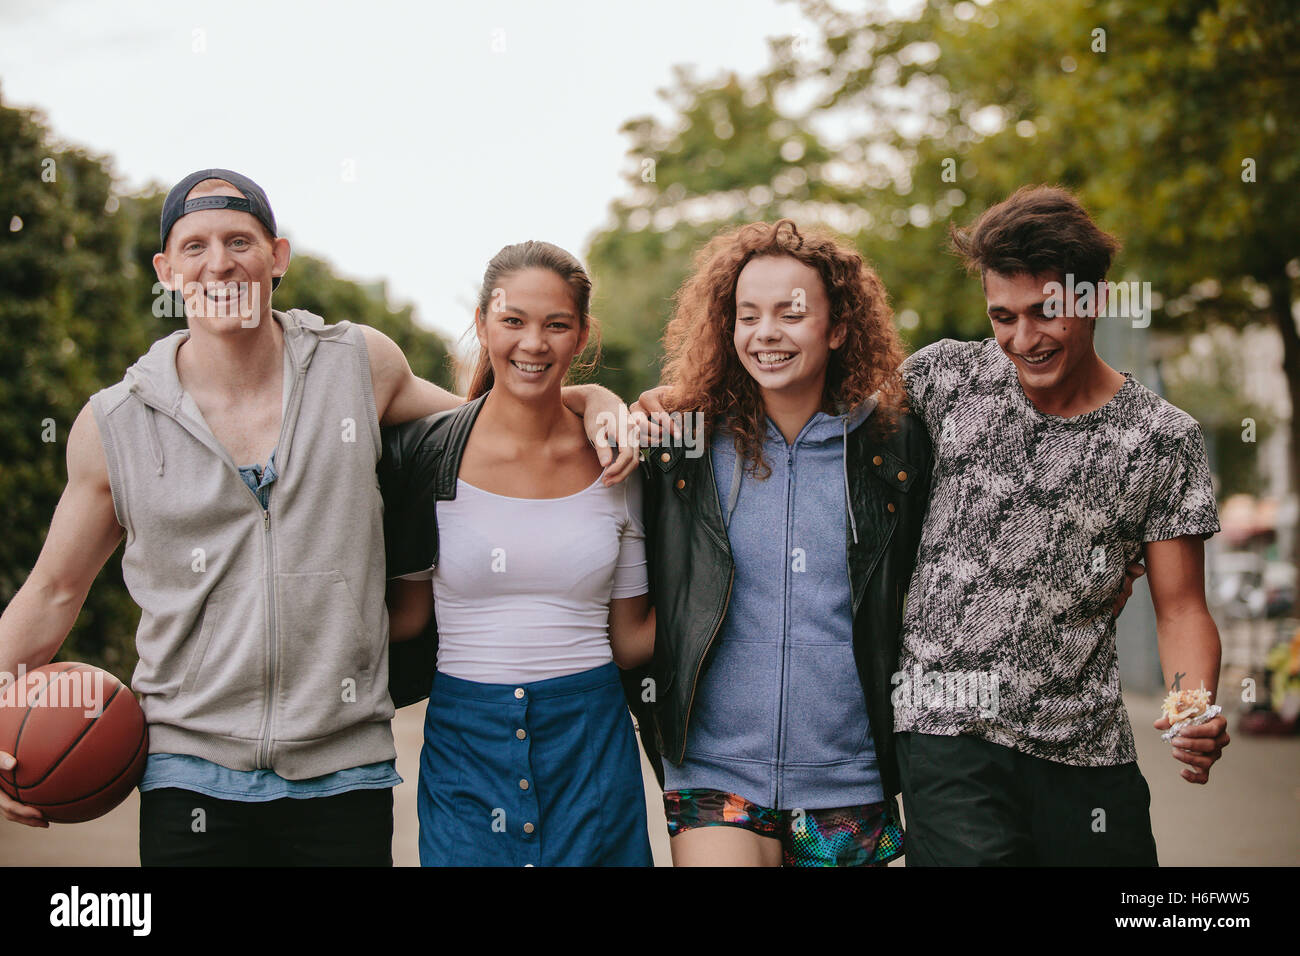 Portrait of multiracial group of people enjoying a walk outdoors. Four young friends walking together and smiling on city street Stock Photo